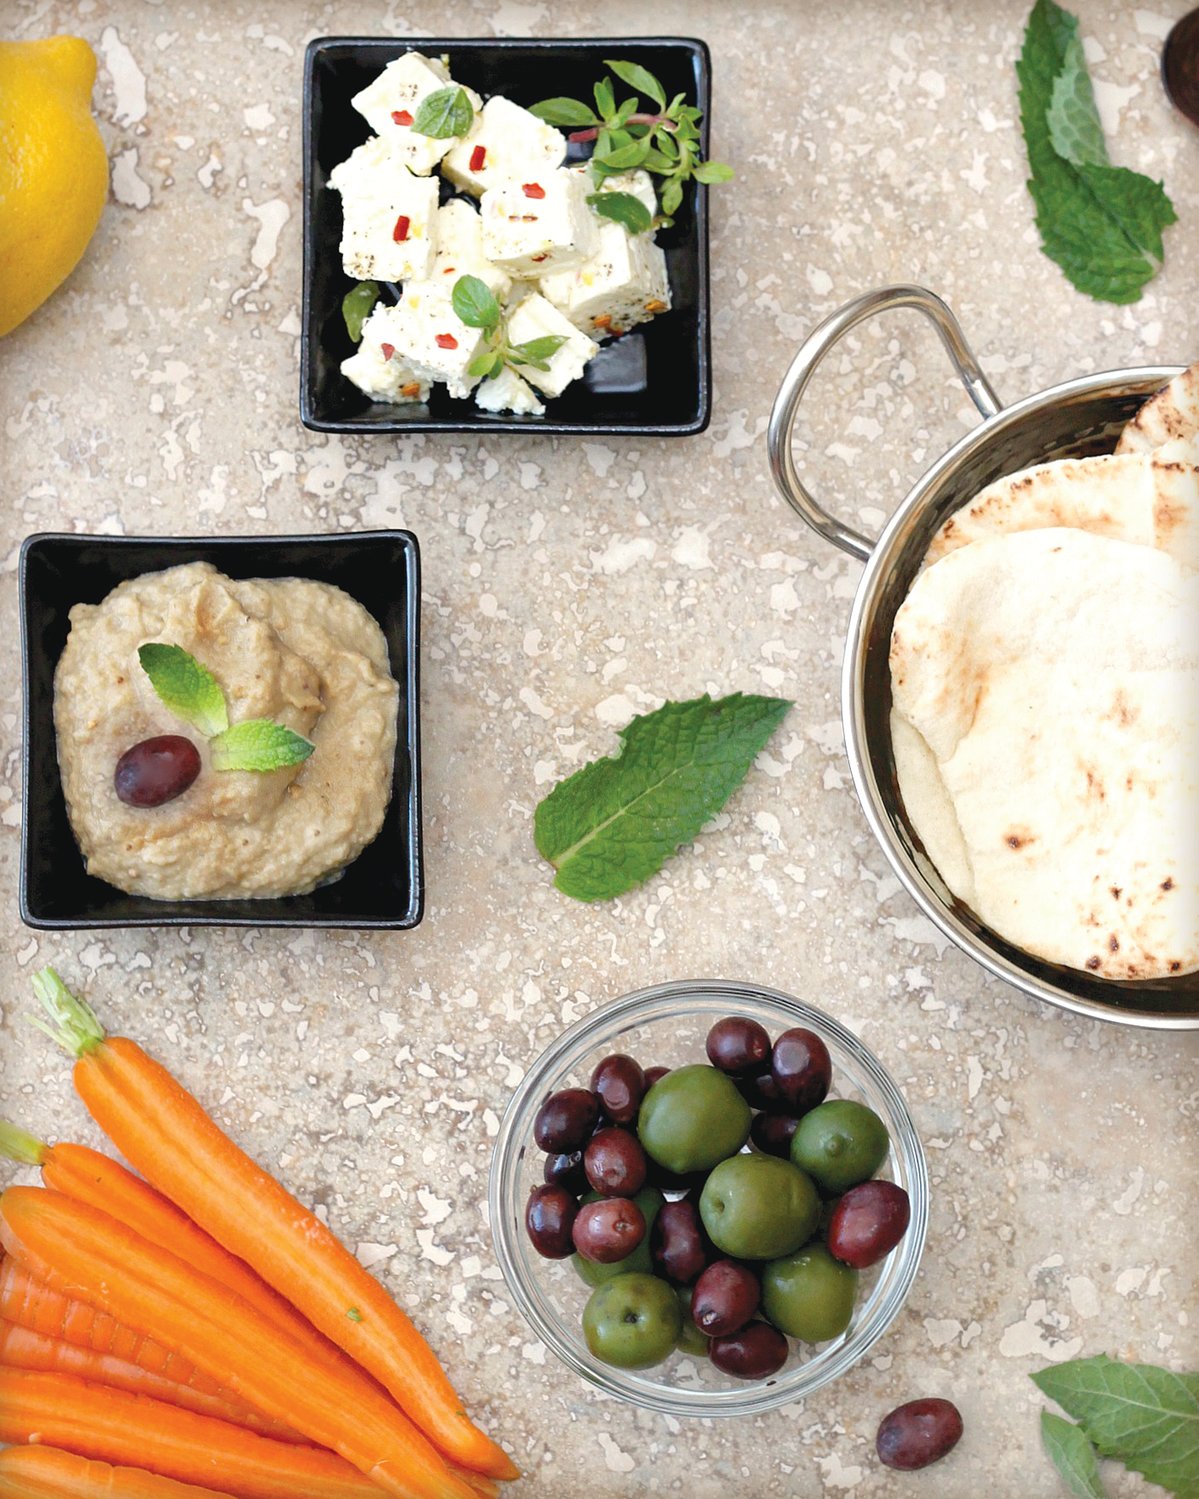 This recipe is inspired by baba ghanoush, which is a traditional Middle Eastern dip made with roasted eggplant, tahini and lemon.